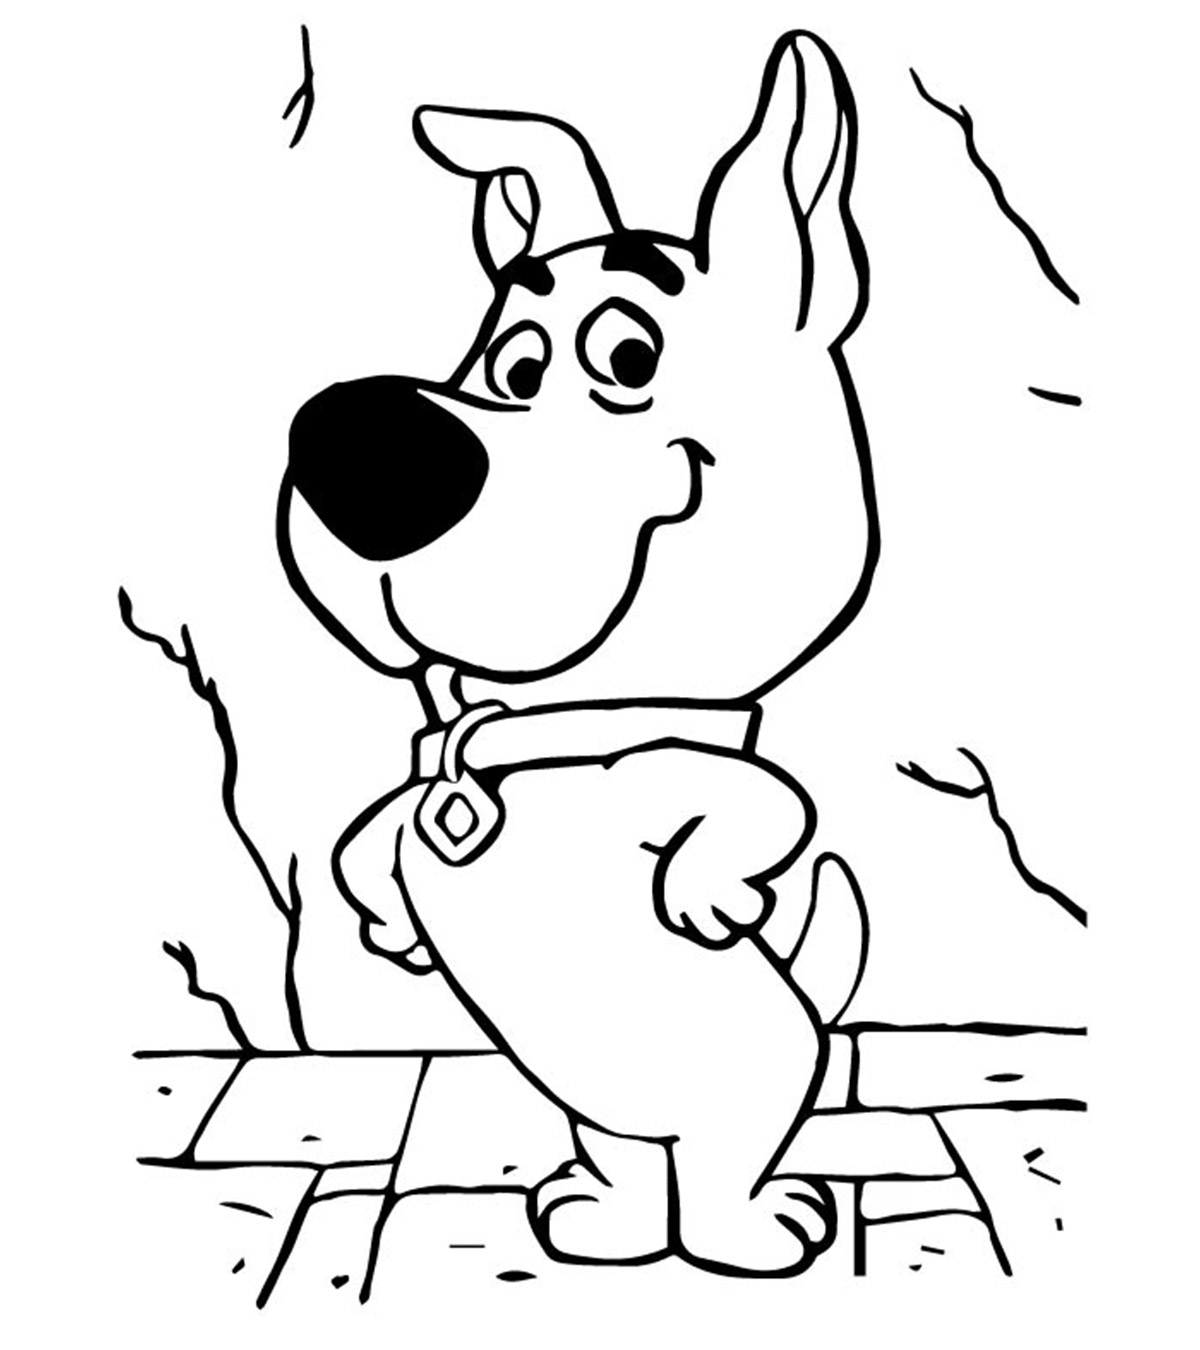 Scooby doo clipart colour, Scooby doo colour Transparent FREE for